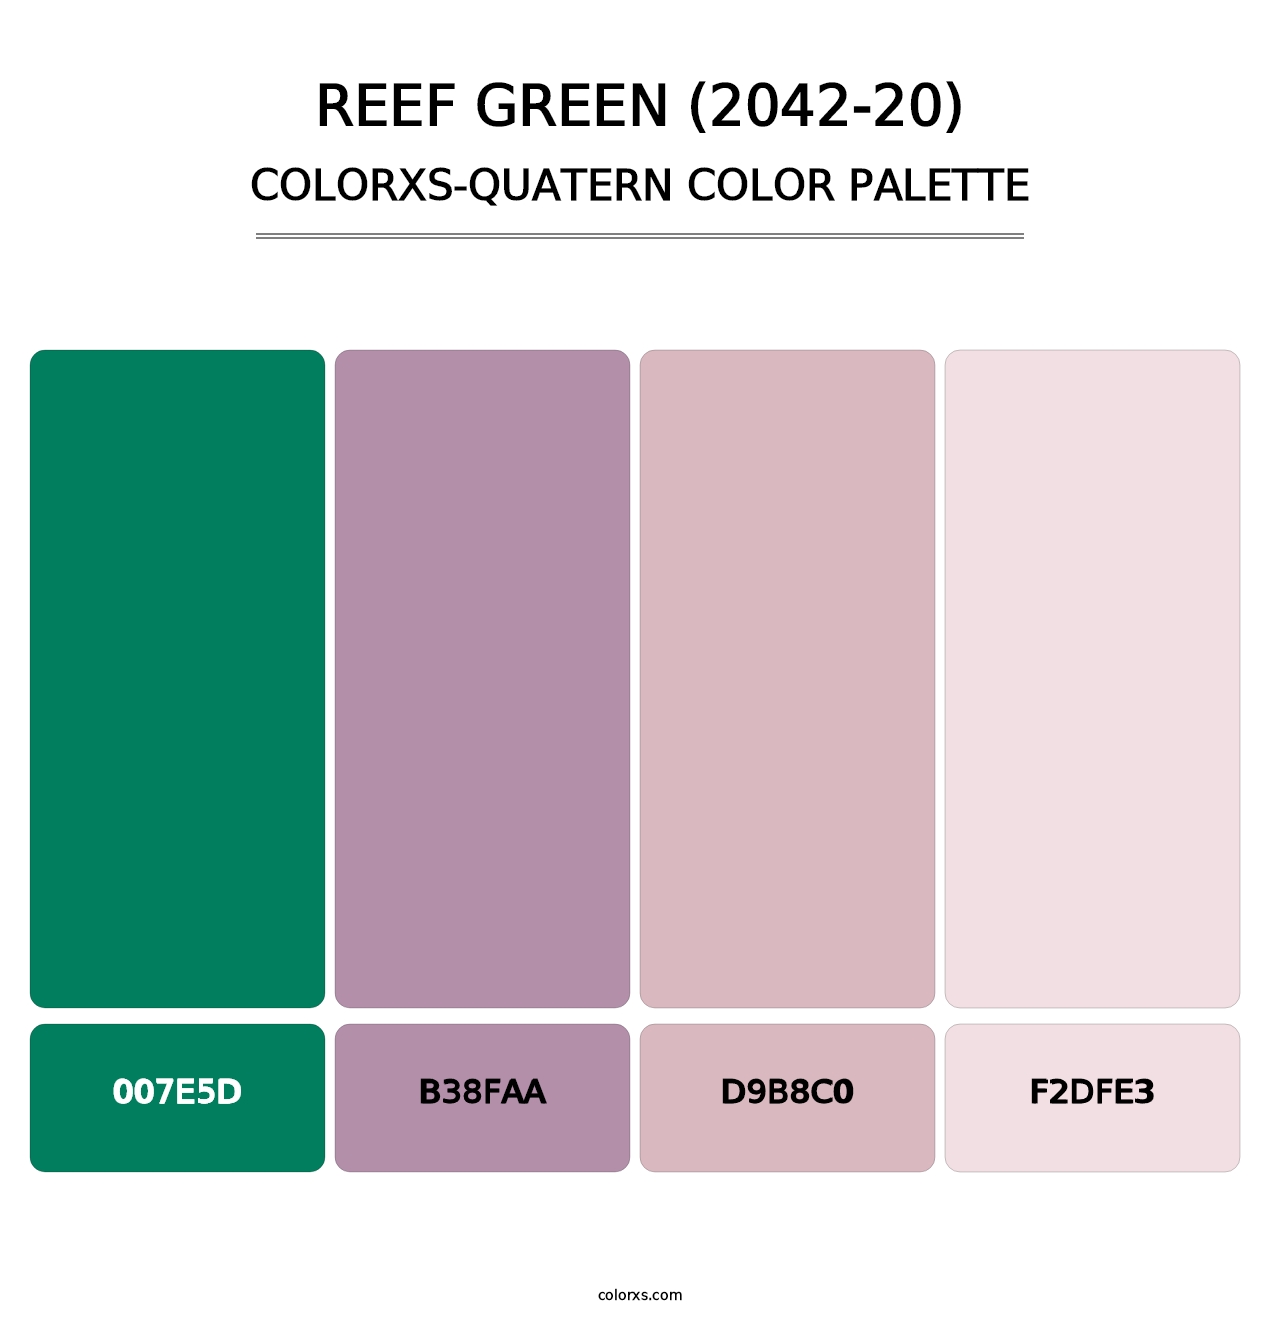 Reef Green (2042-20) - Colorxs Quatern Palette